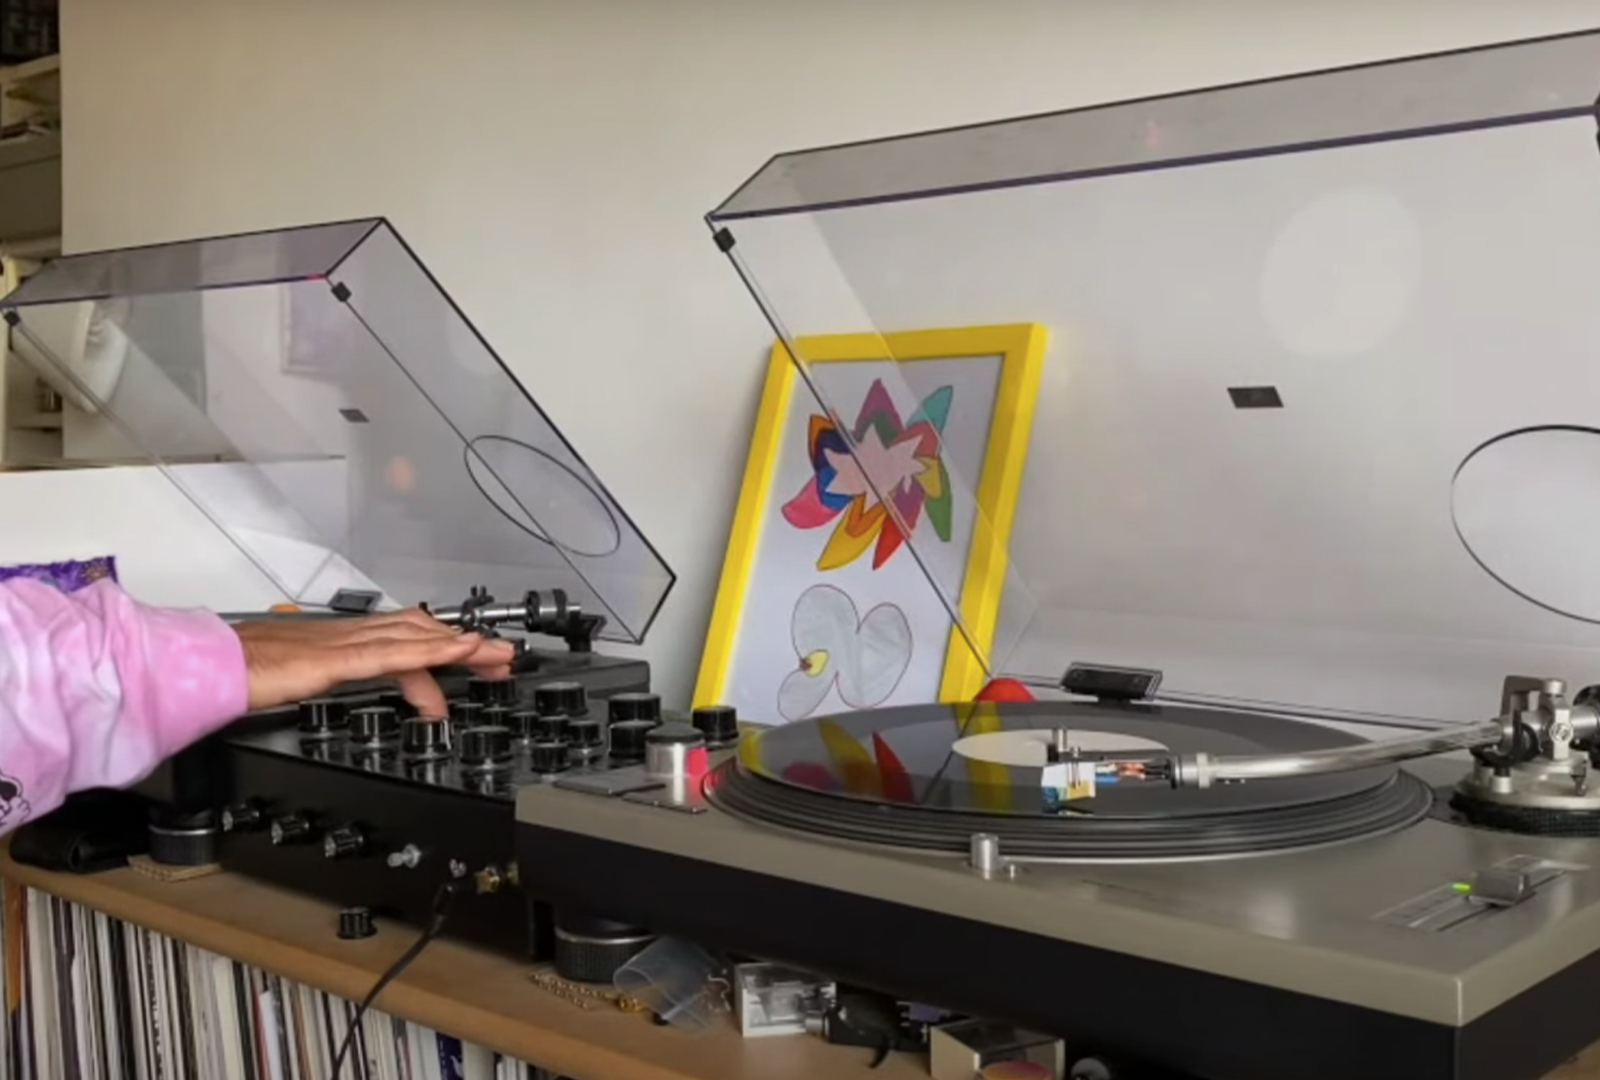 Four Tet has been records in a live stream for a month